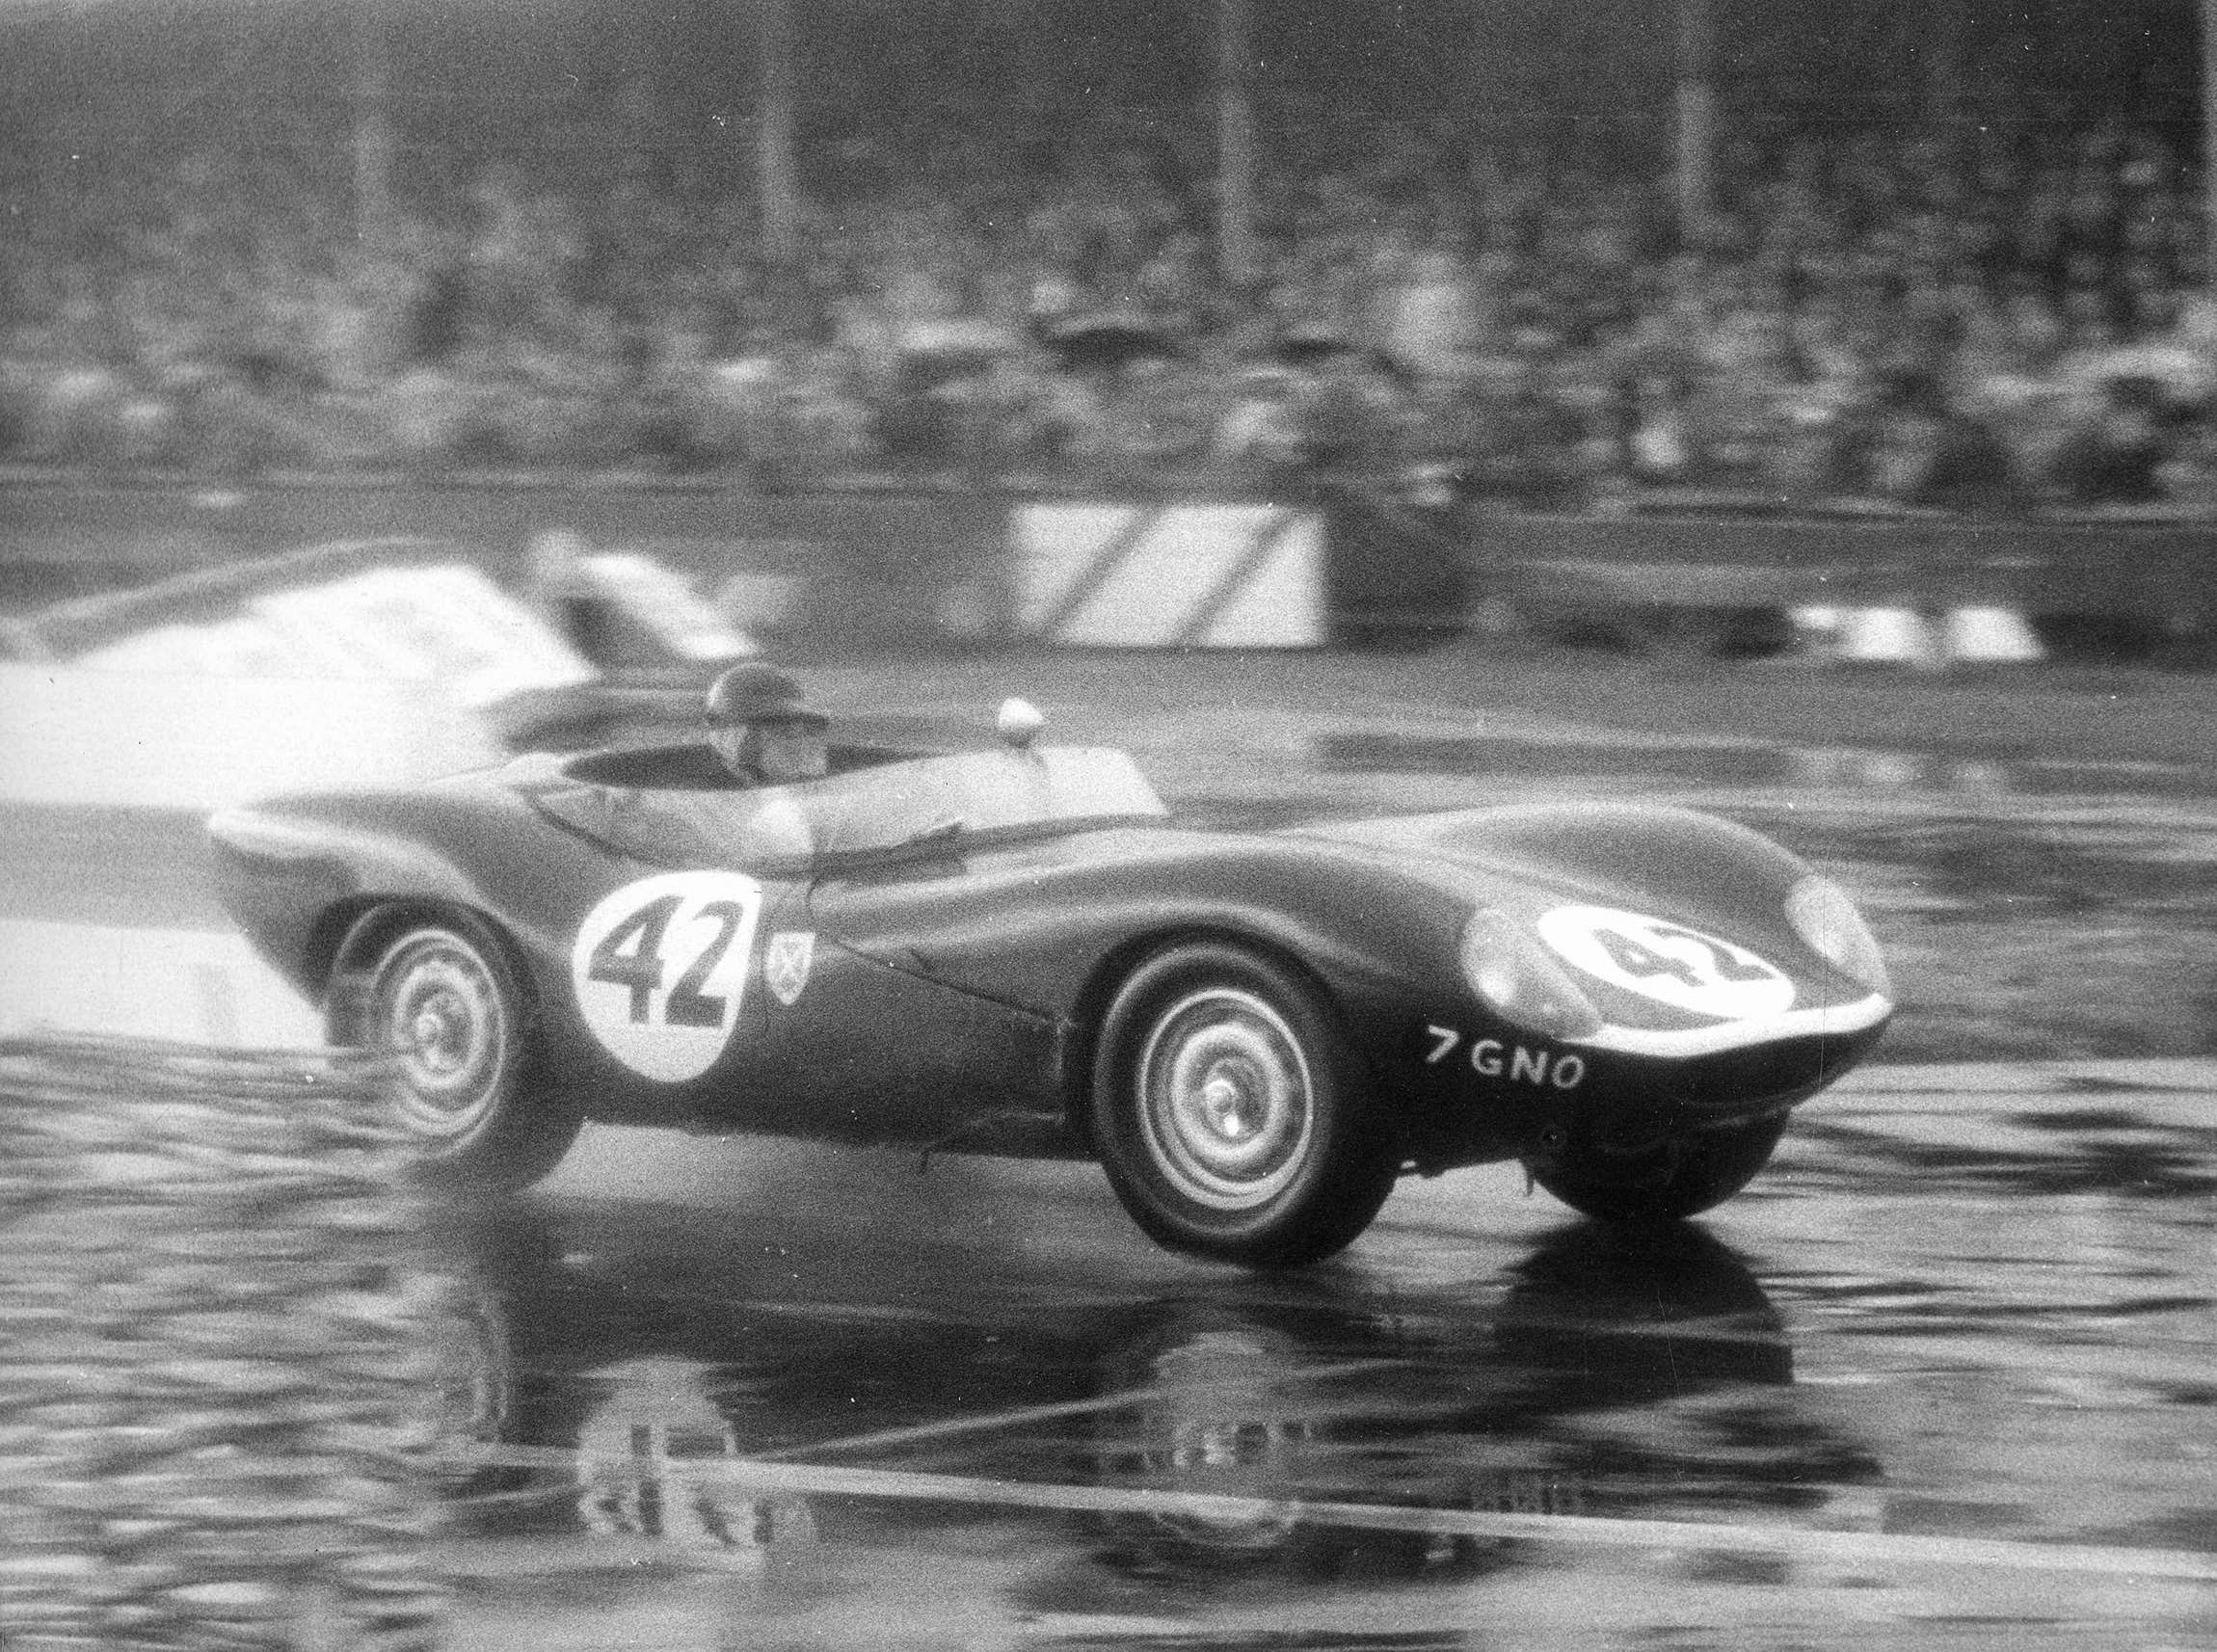 Later years - a soggy day at Goodwood - 1959 Easter Monday - Jock Lawrence splashing home 2nd in the Sussex Trophy race, Ecosse Tojeiro-Jaguar